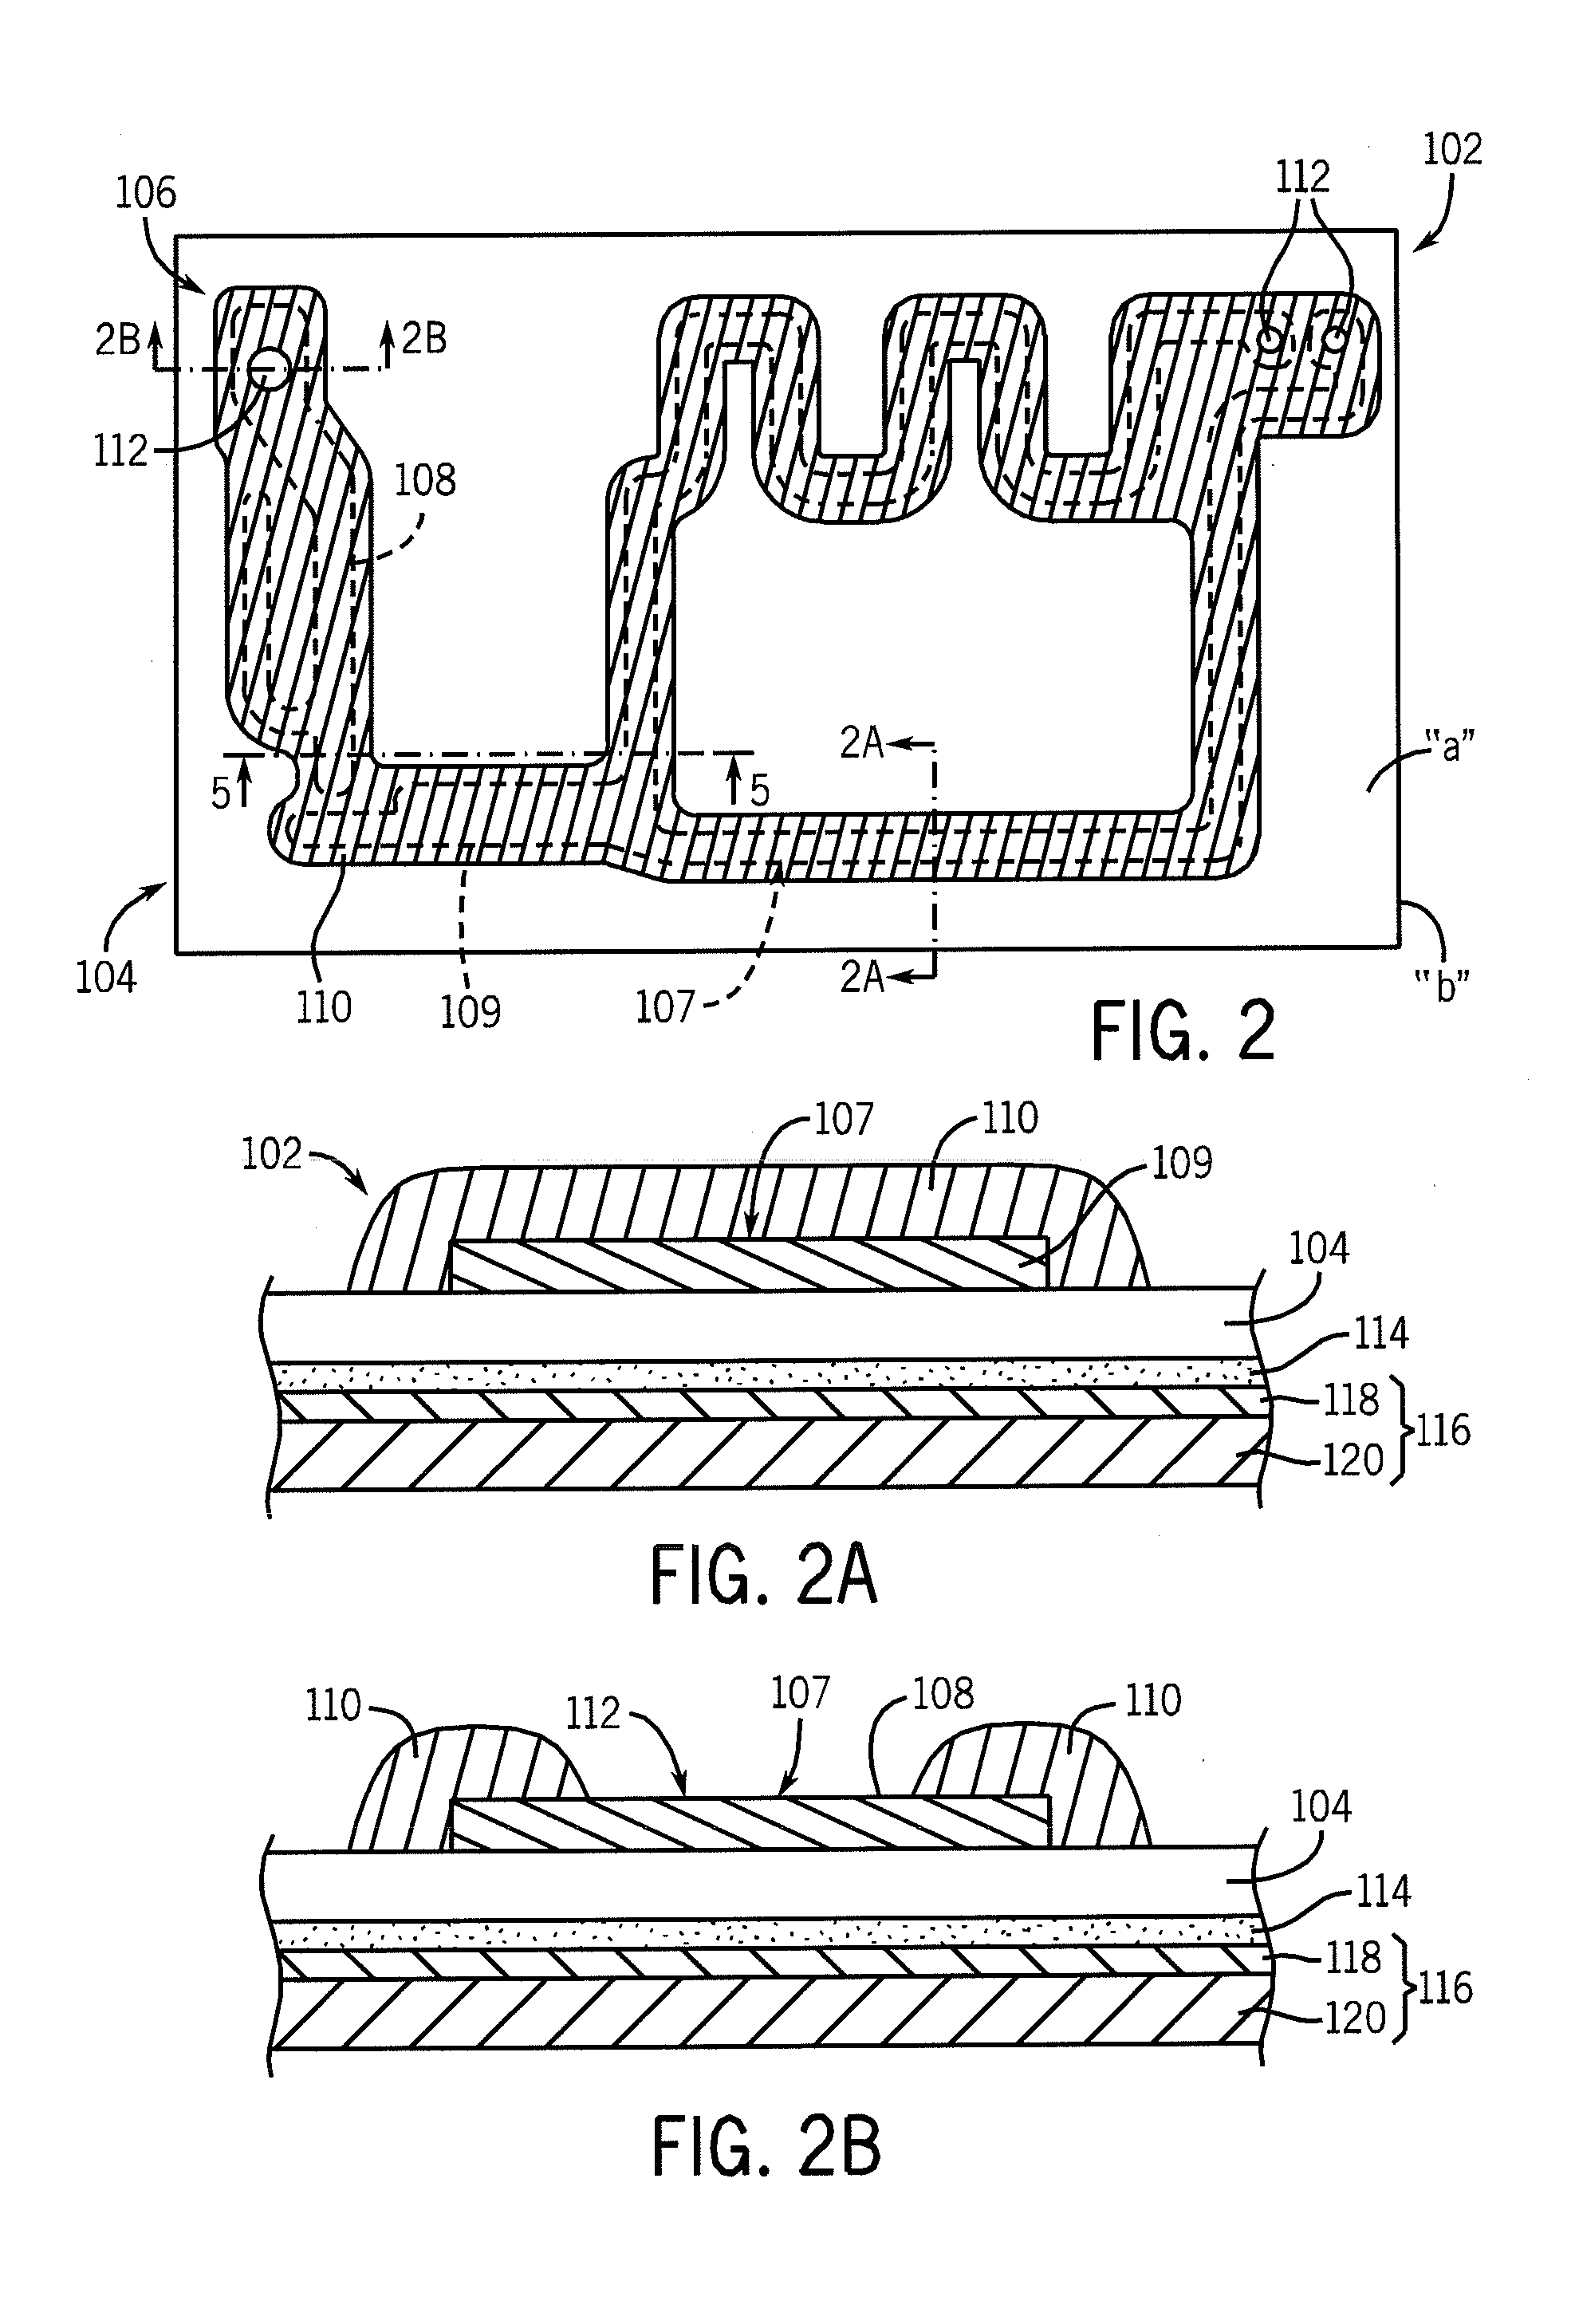 Method of Manufacturing and Operating an Antenna Arrangement for a Communication Device